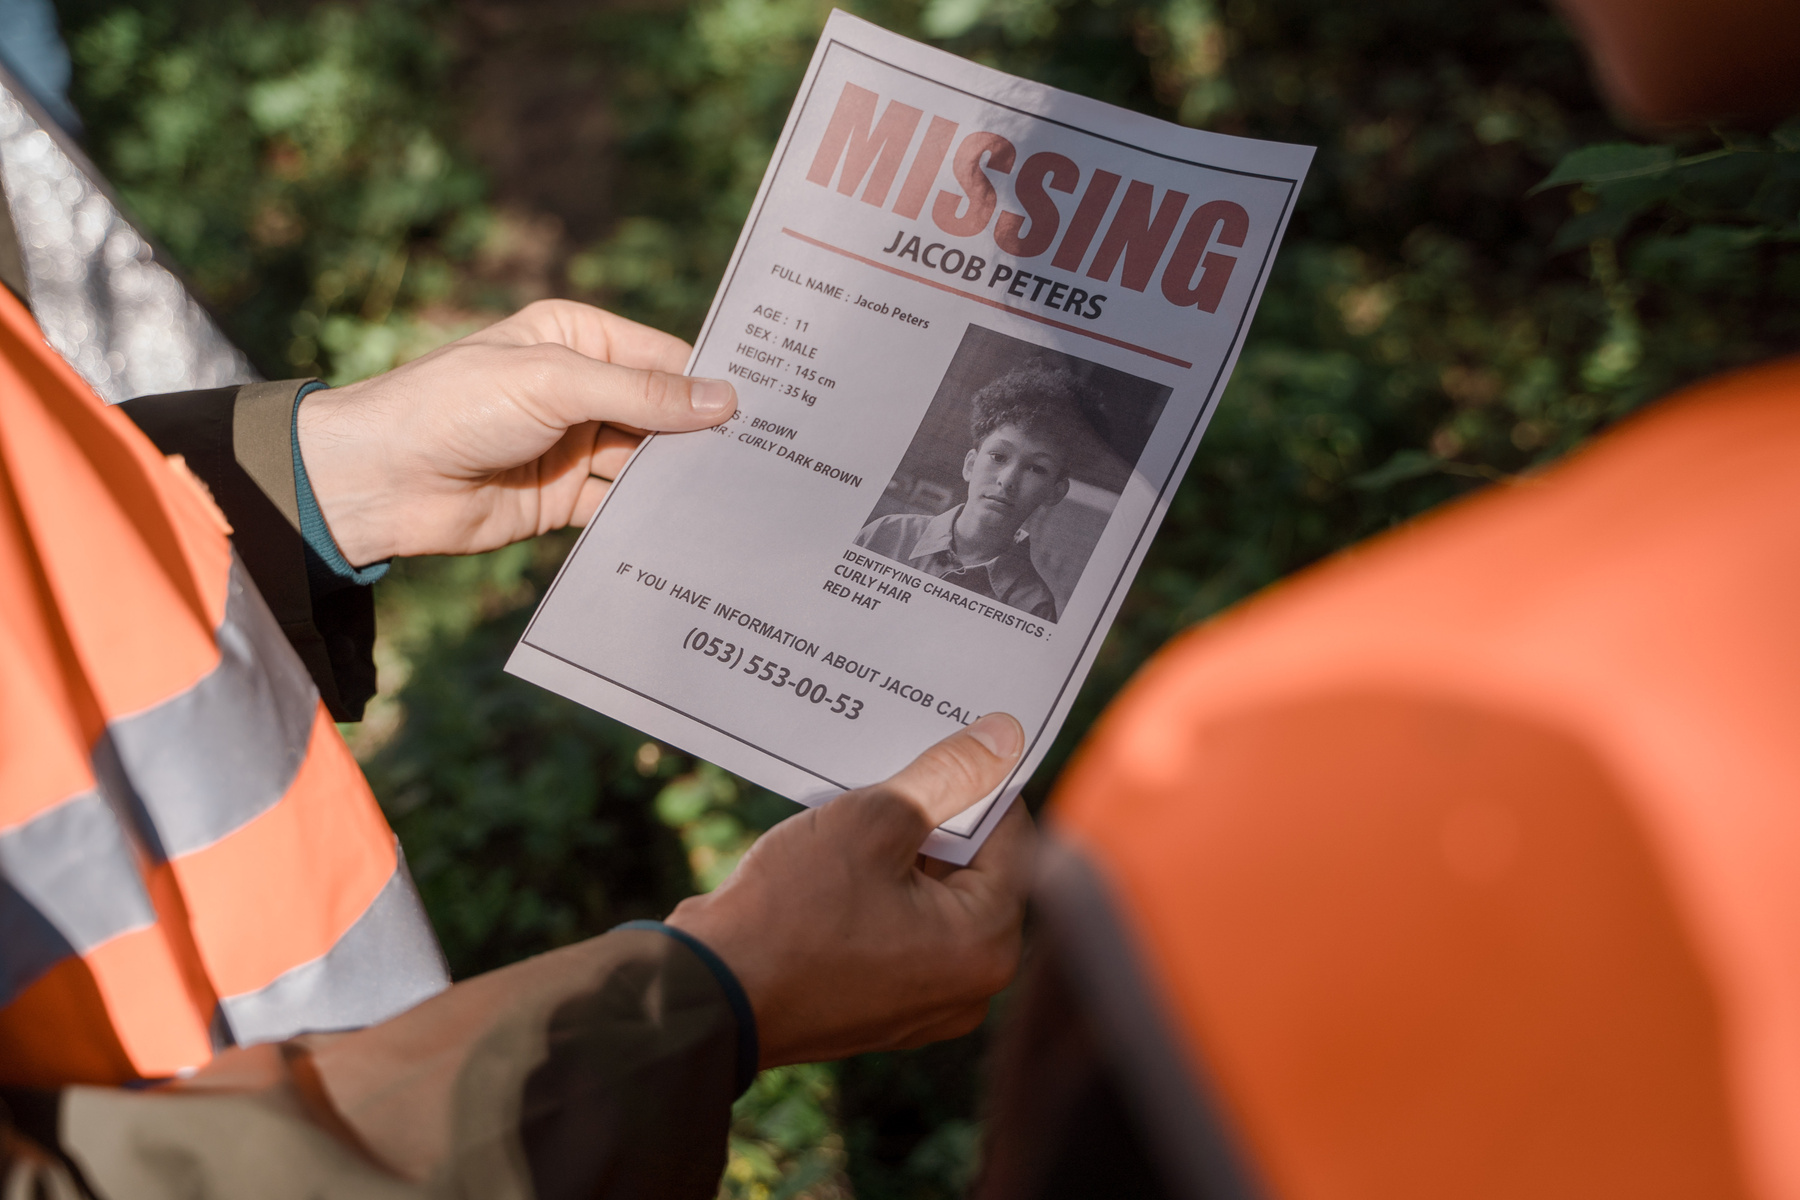 Search Party for Missing Person